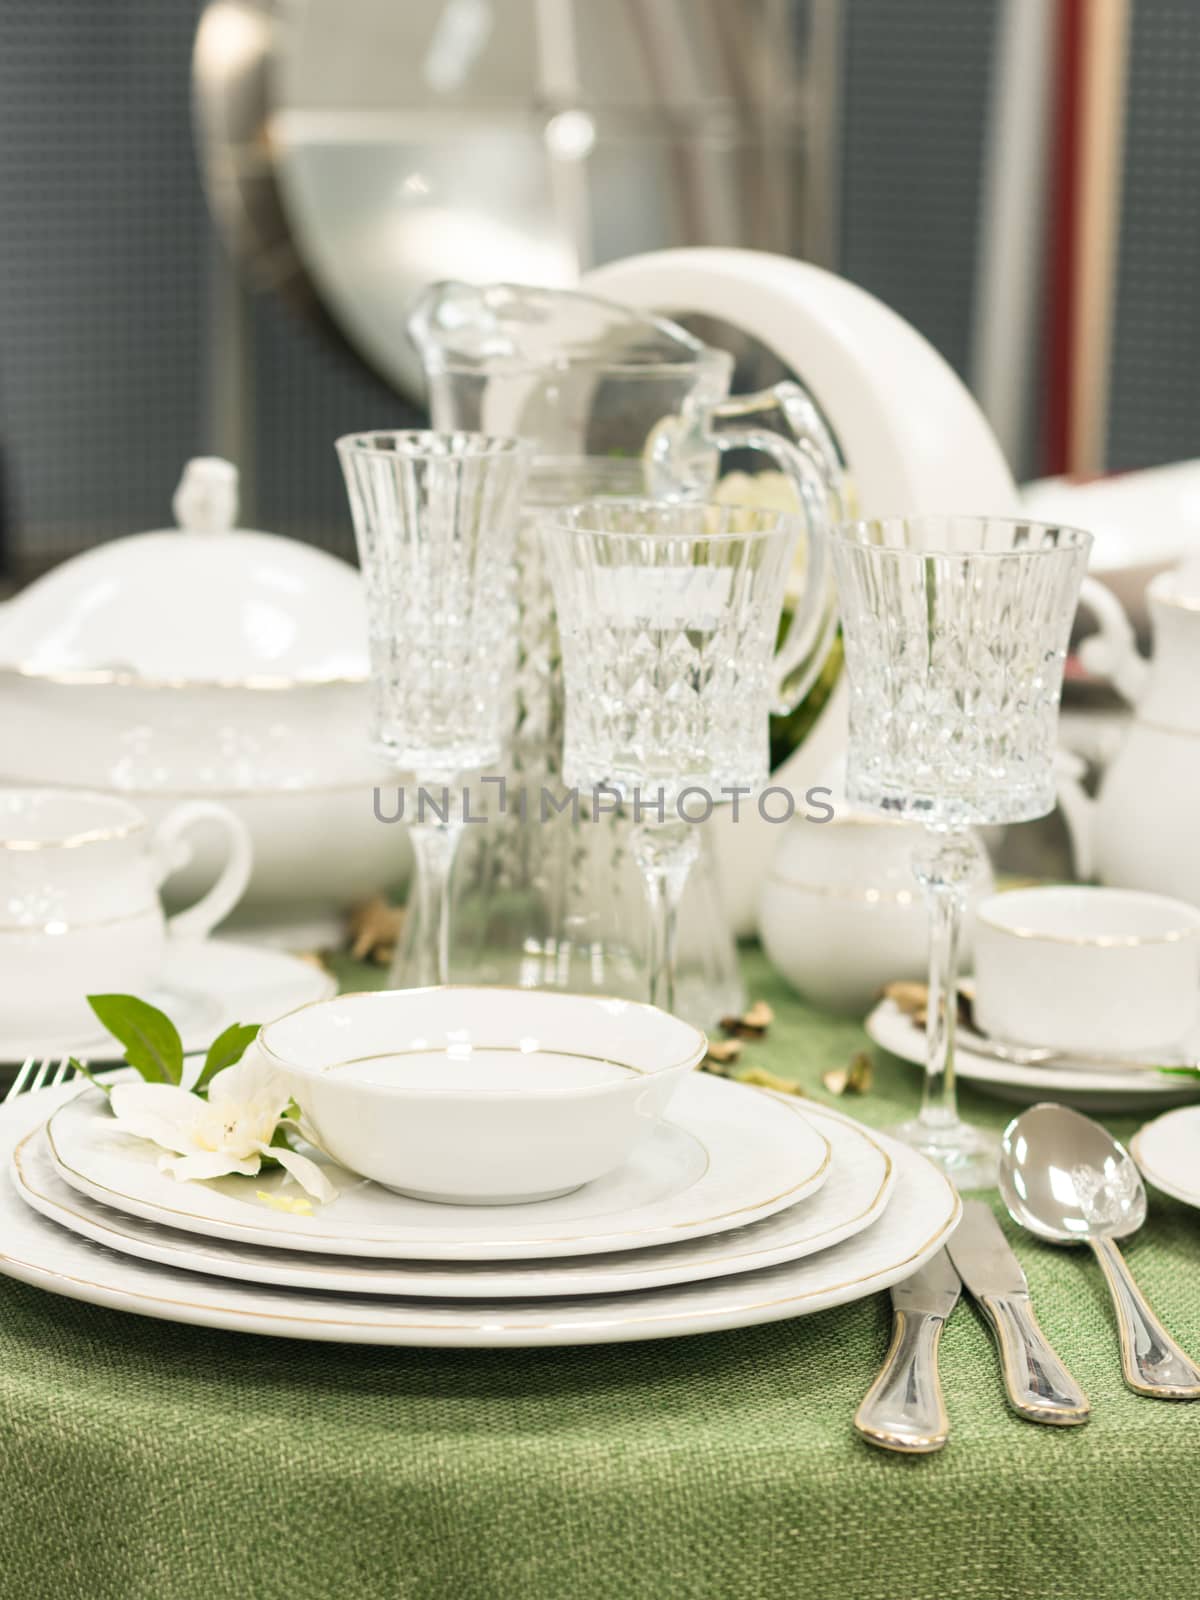 Set of dishes on table by fascinadora